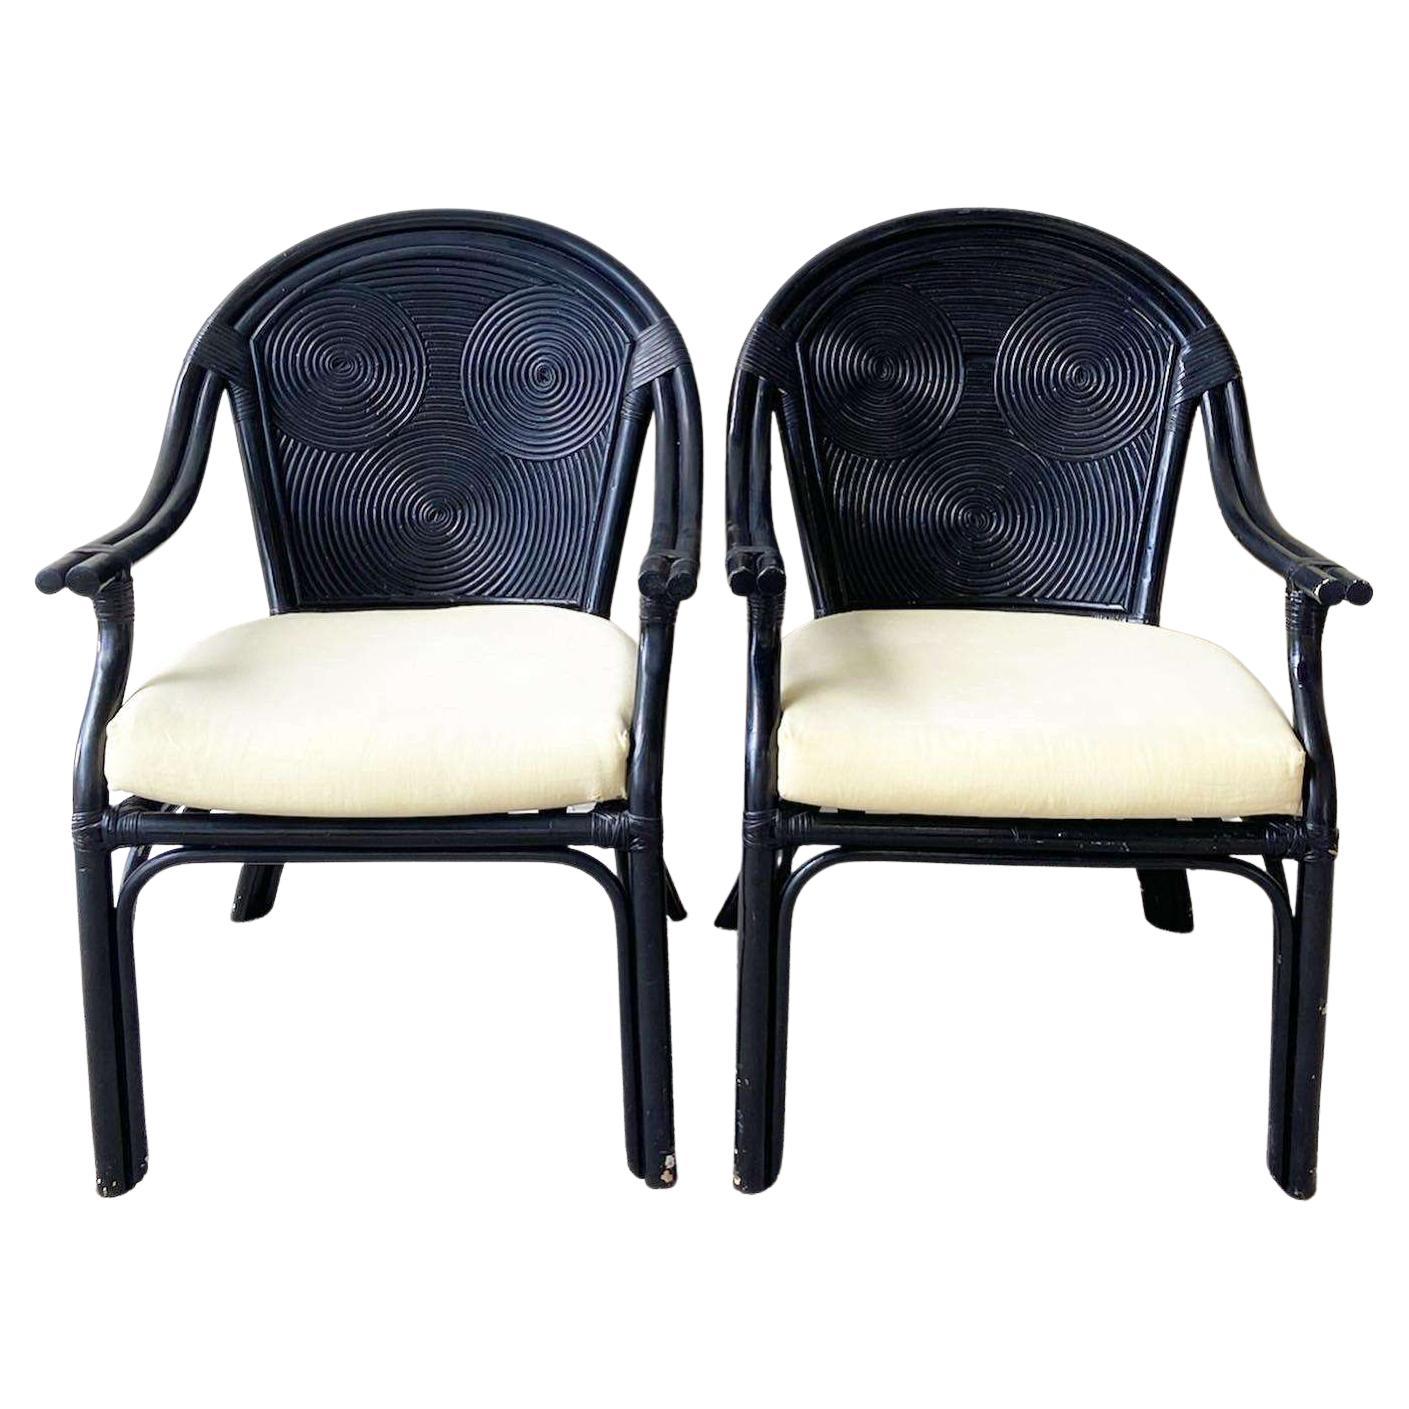 Boho Chic Black Pencil Reed Arm Chairs - a Pair For Sale